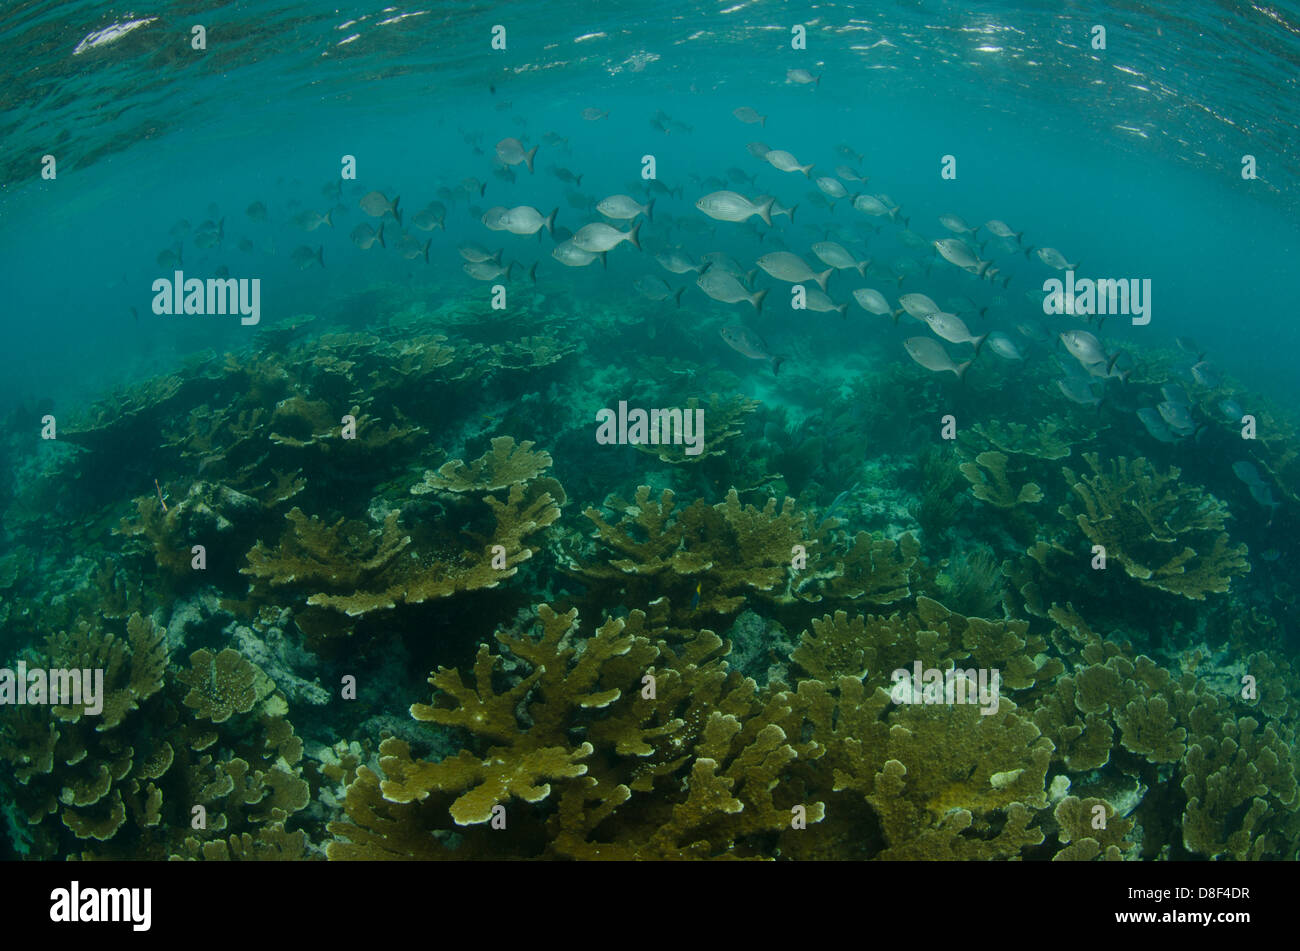 A school of fish swims over a patch of elkhorn coral near the surface Stock Photo